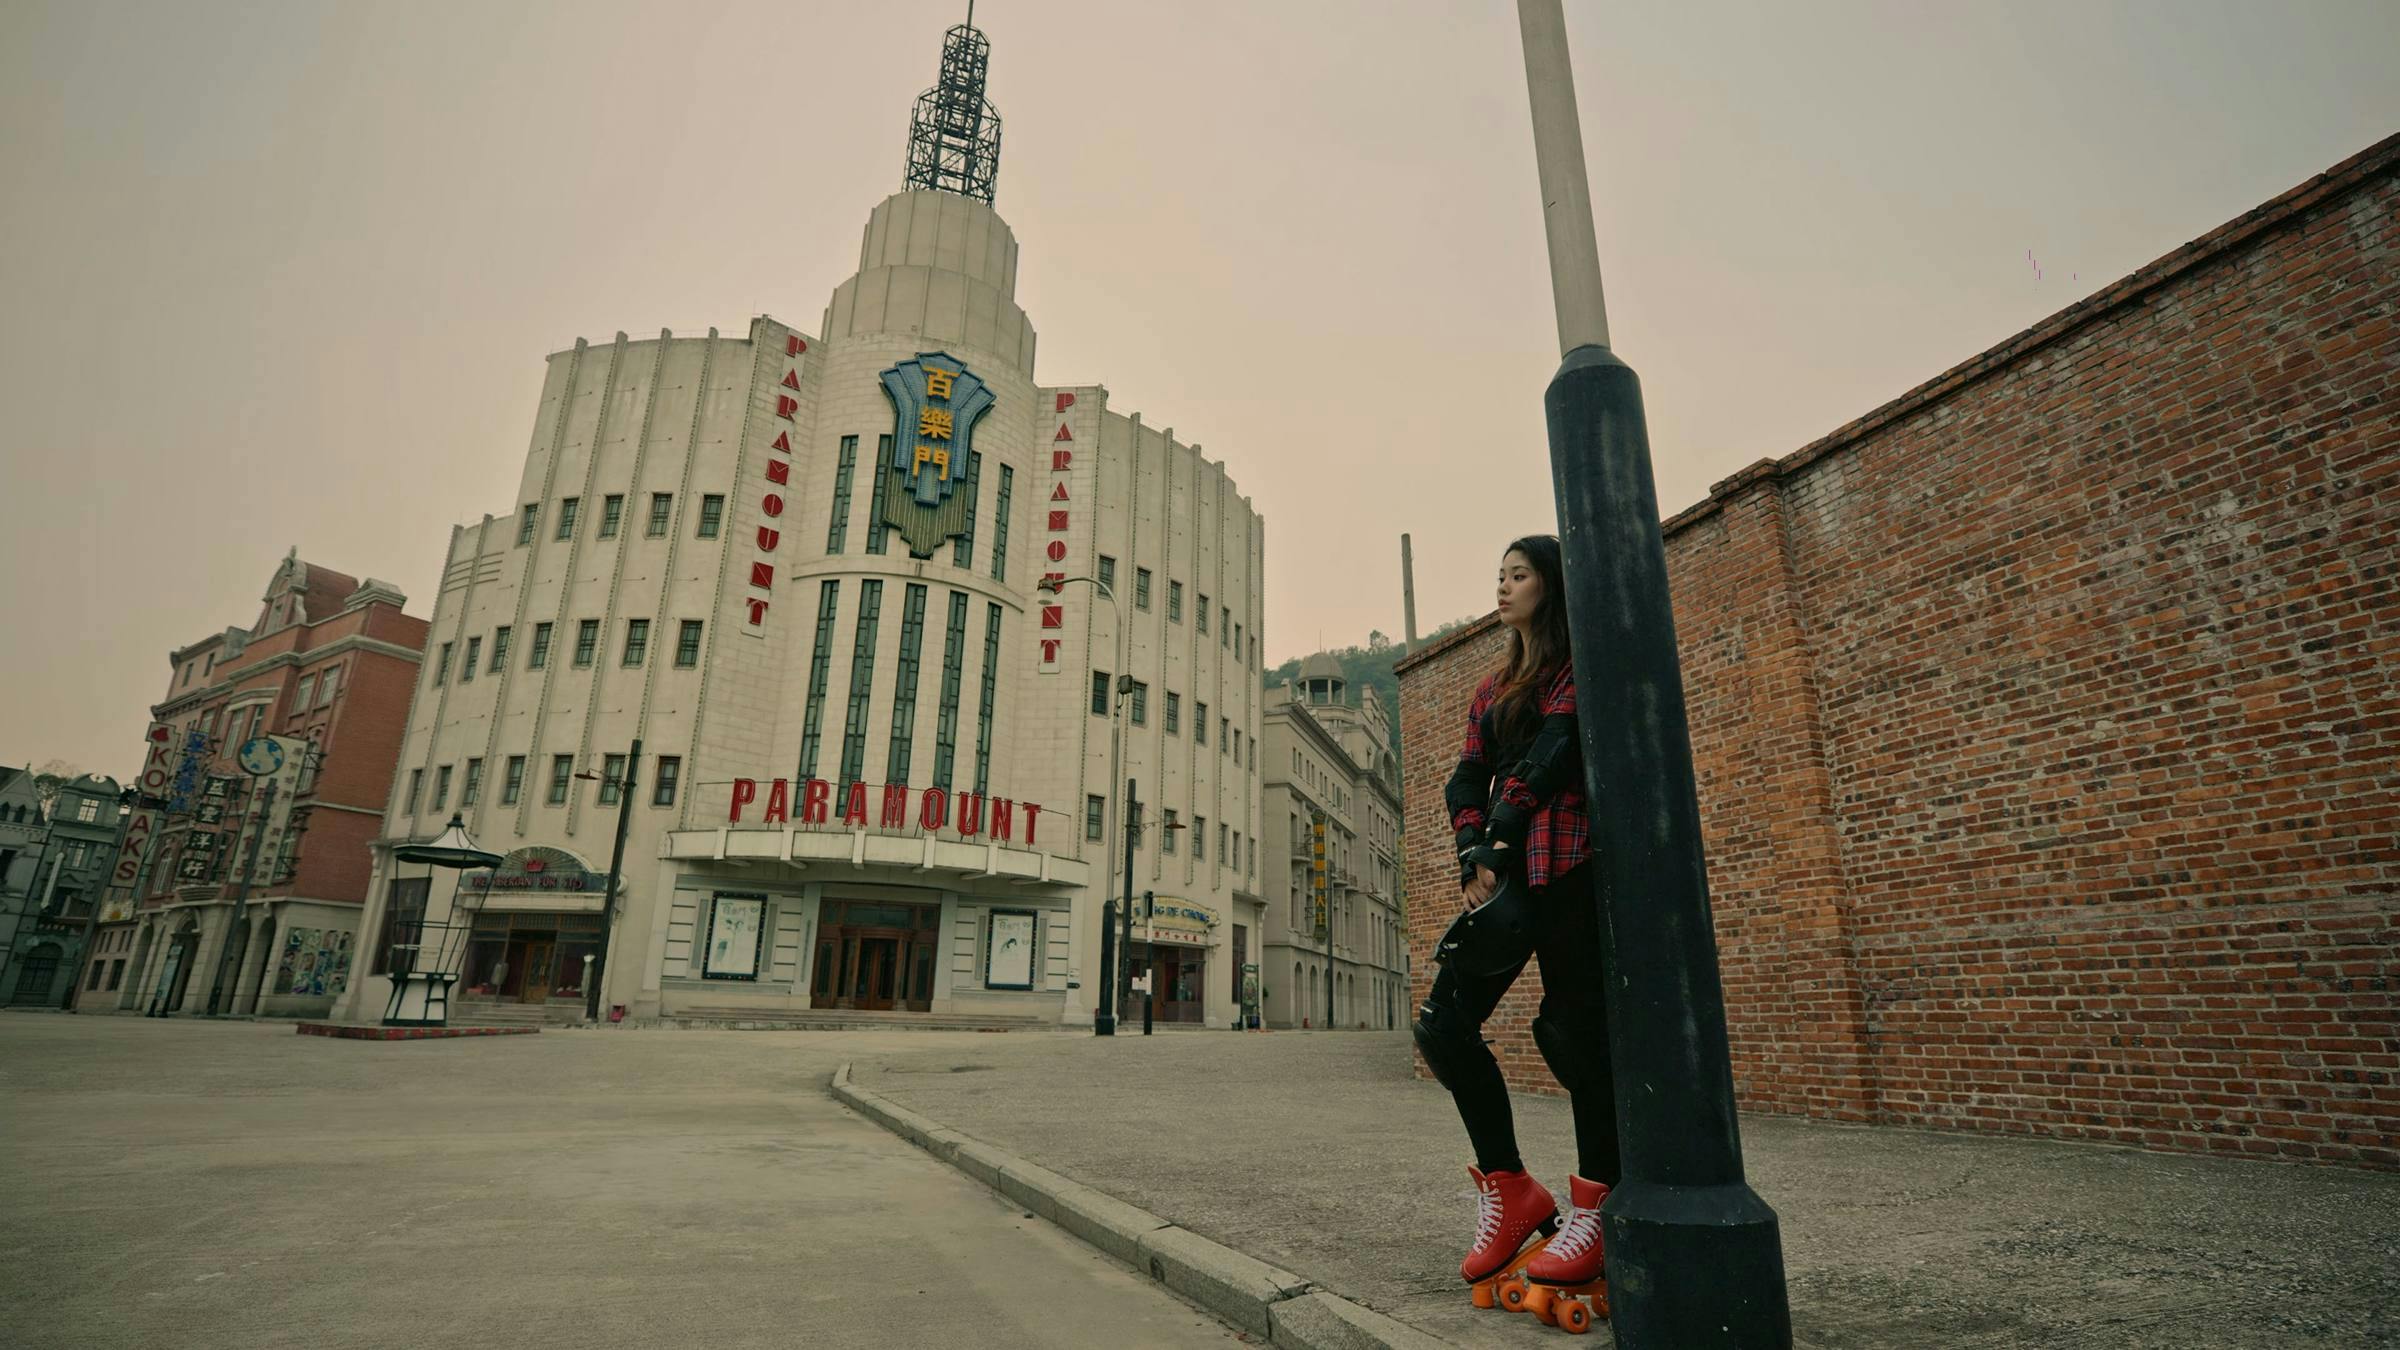 Image of someone wearing orange roller skates stood next to a street lamp on a street corner. A large grey building is in the background and the street is empty.